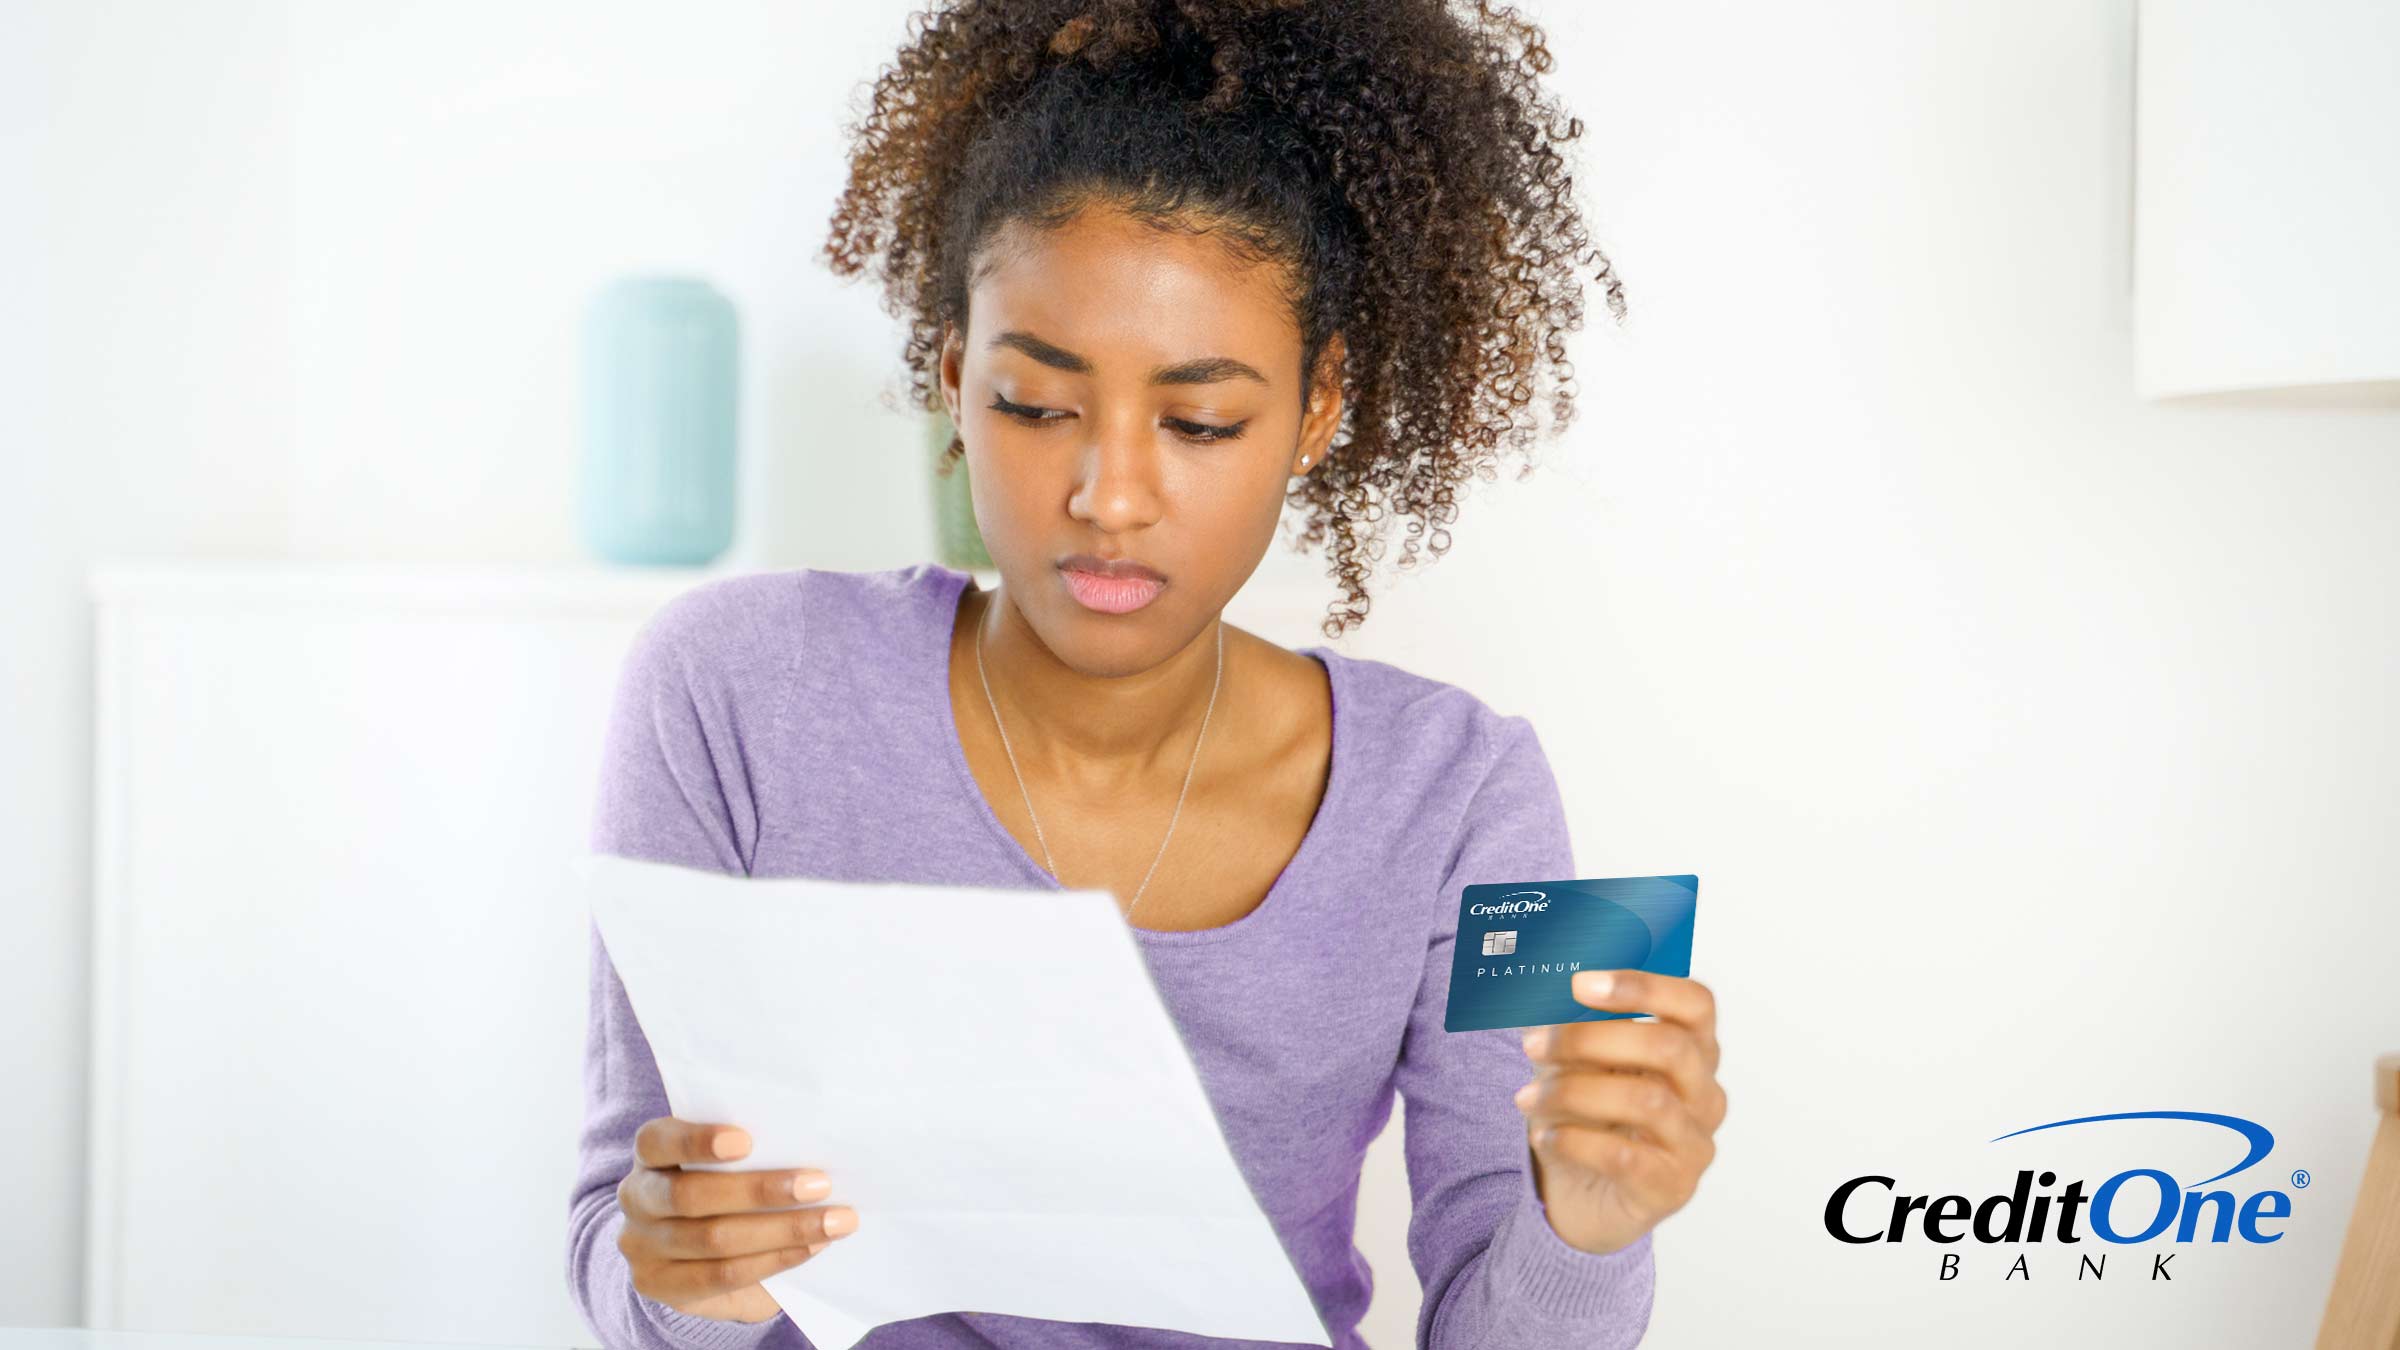 A woman looks confused with something on her credit card bill.